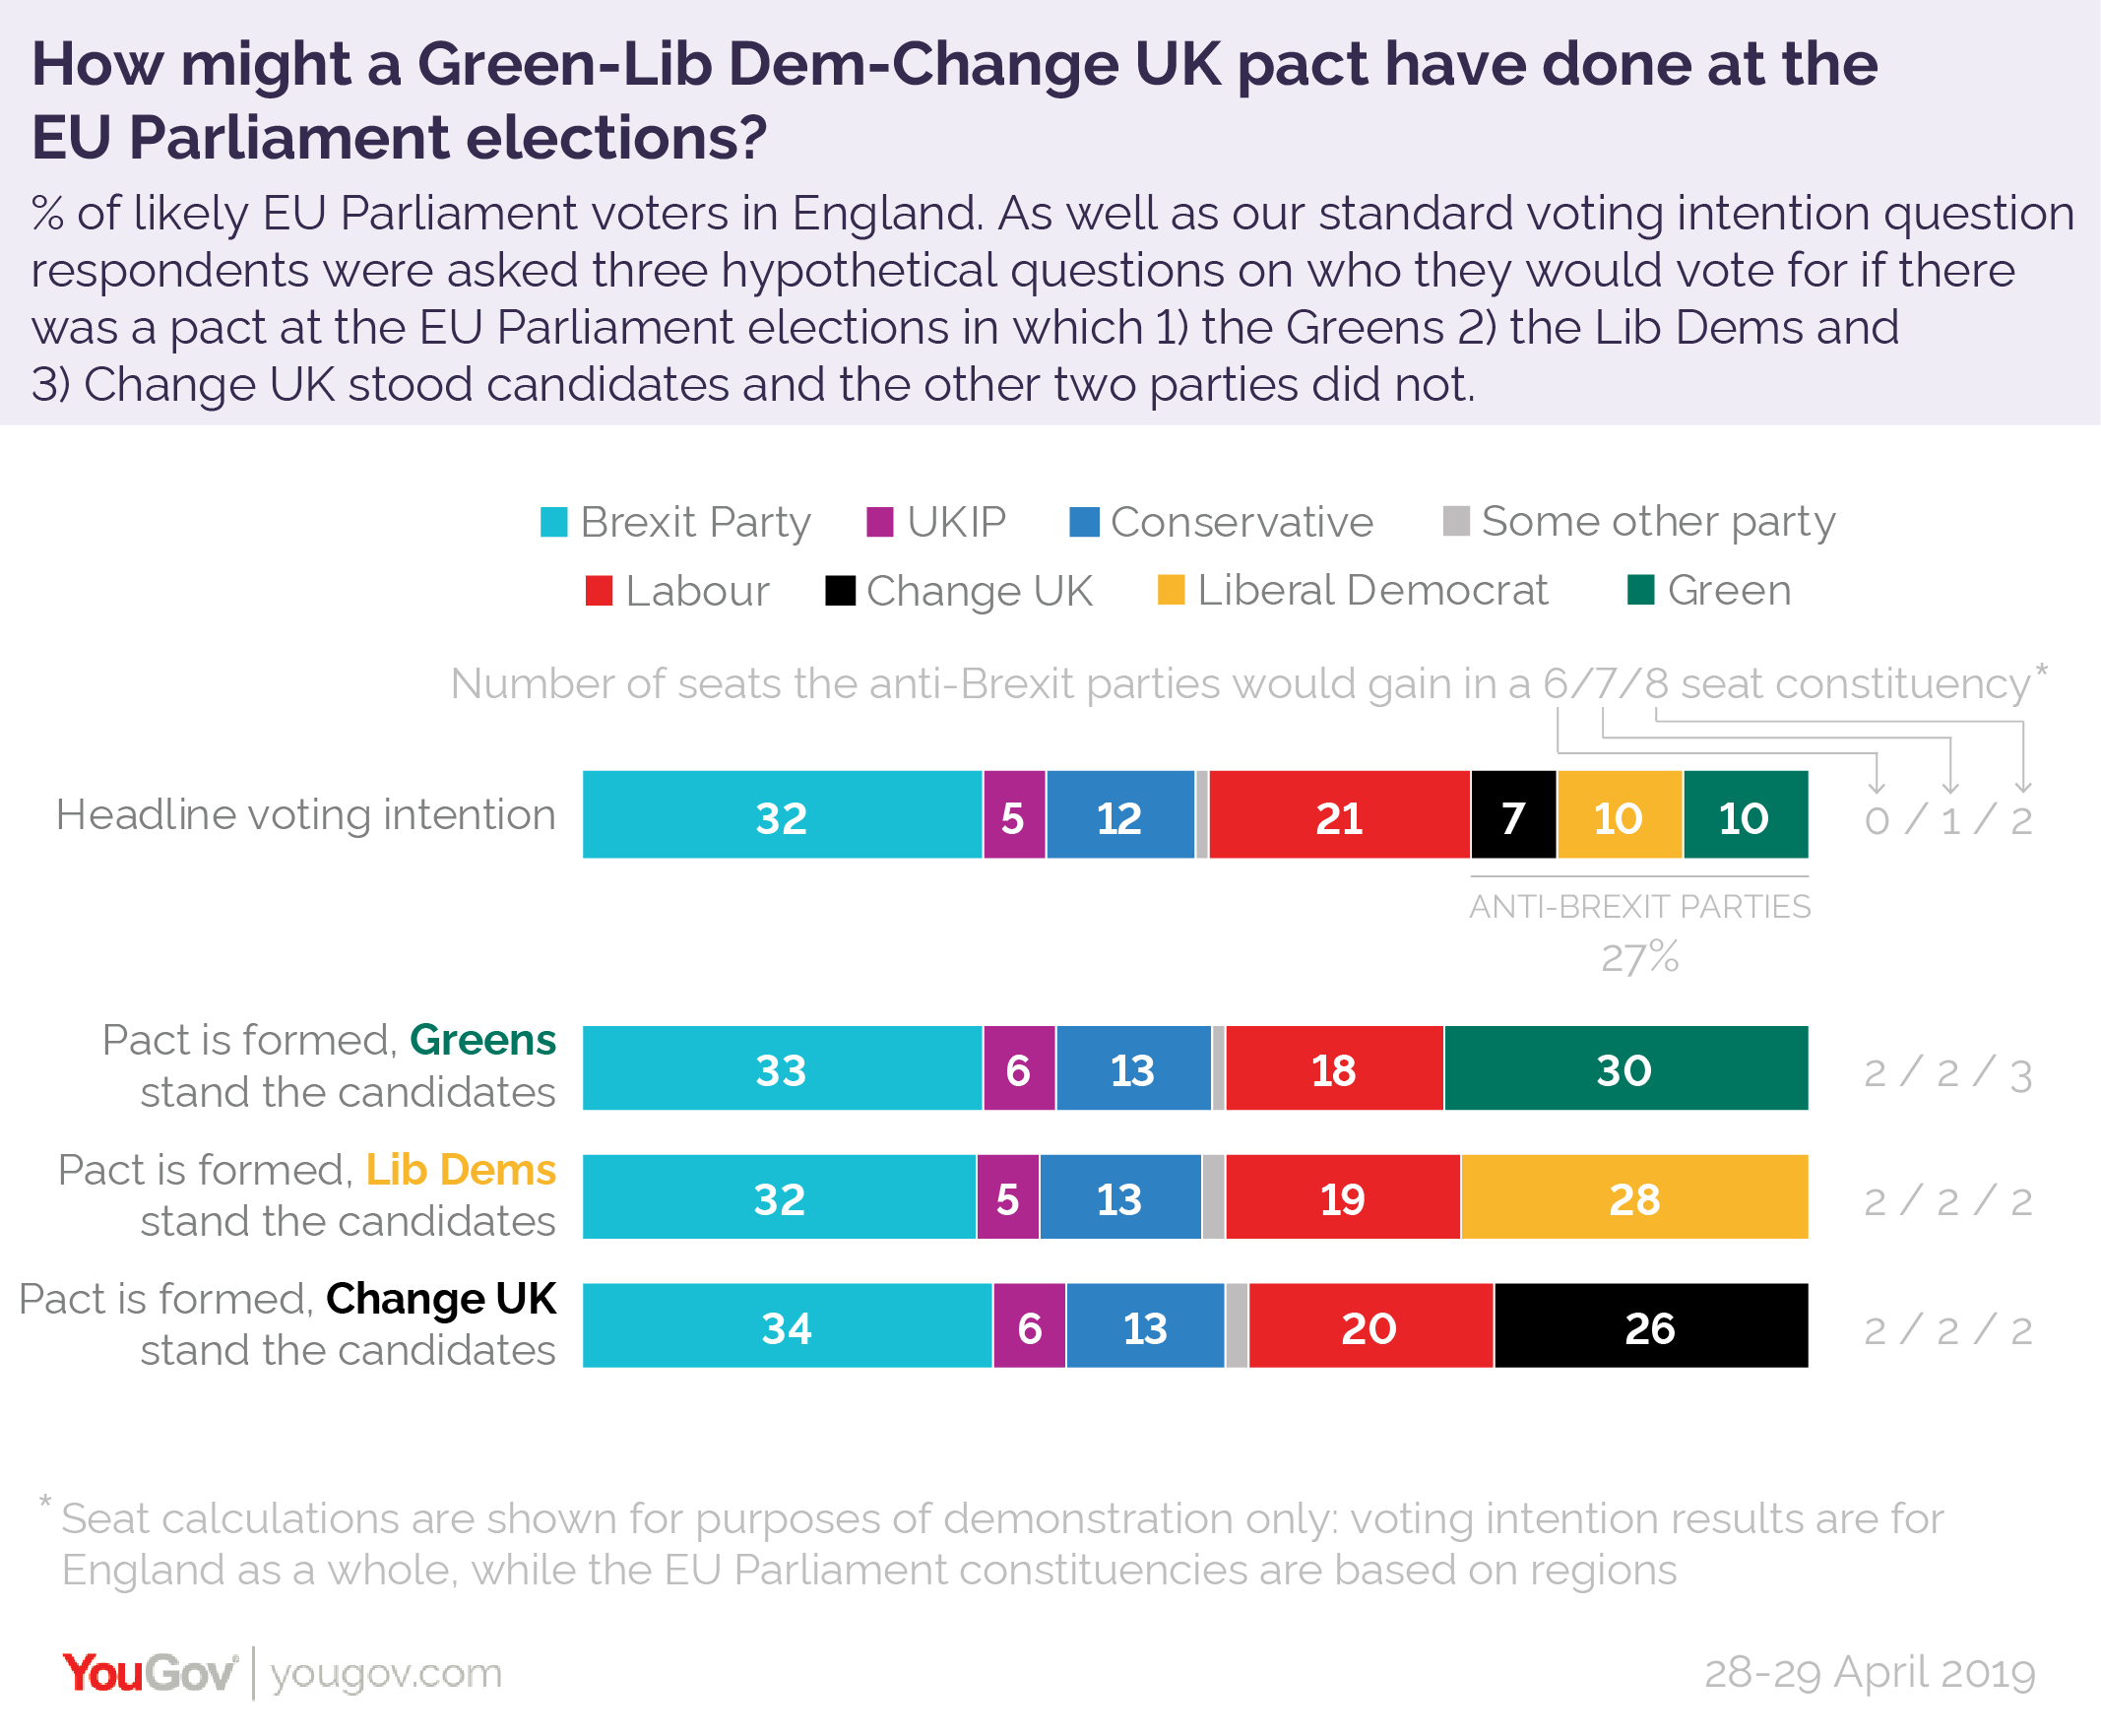 How might a GreenLib DemChange UK pact have done at the EU elections